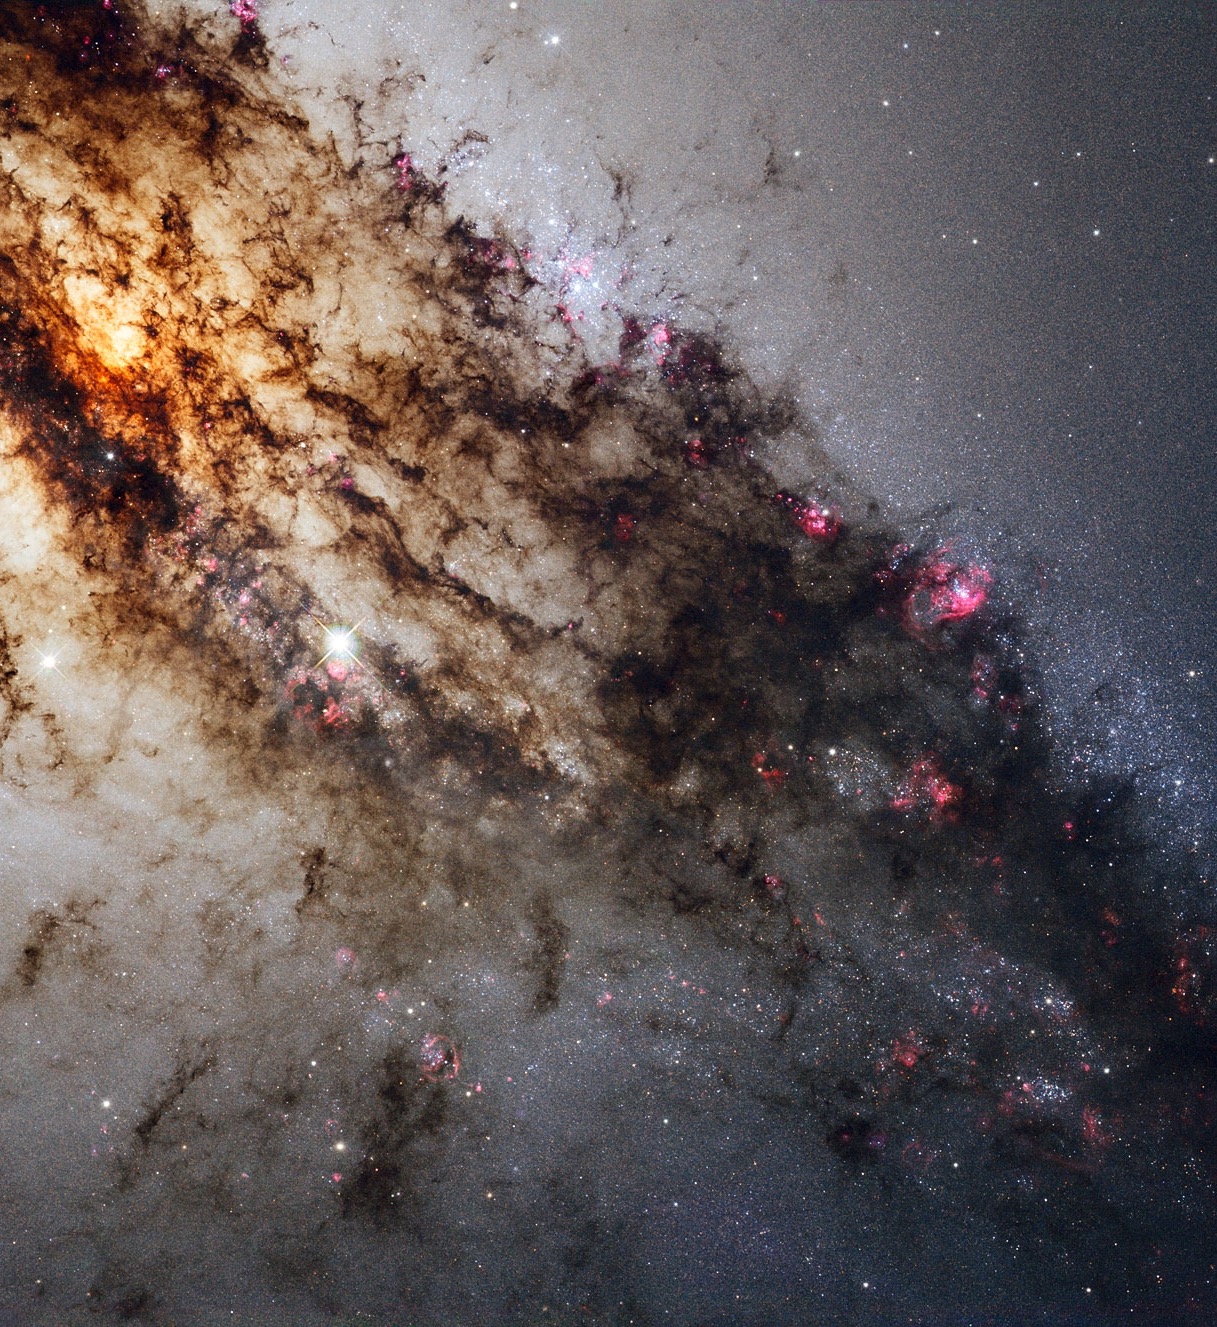 Centaurus A, also known as NGC 5128, is well known for its dramatic dusty lanes of dark material. Hubble’s new observations, using its most advanced instrument, the Wide Field Camera 3, are the most detailed ever made of this galaxy. They have been combined here in a multi-wavelength image which reveals never-before-seen detail in the dusty portion of the galaxy. As well as features in the visible spectrum, this composite shows ultraviolet light, which comes from young stars, and near-infrared light, which lets us glimpse some of the detail otherwise obscured by the dust.